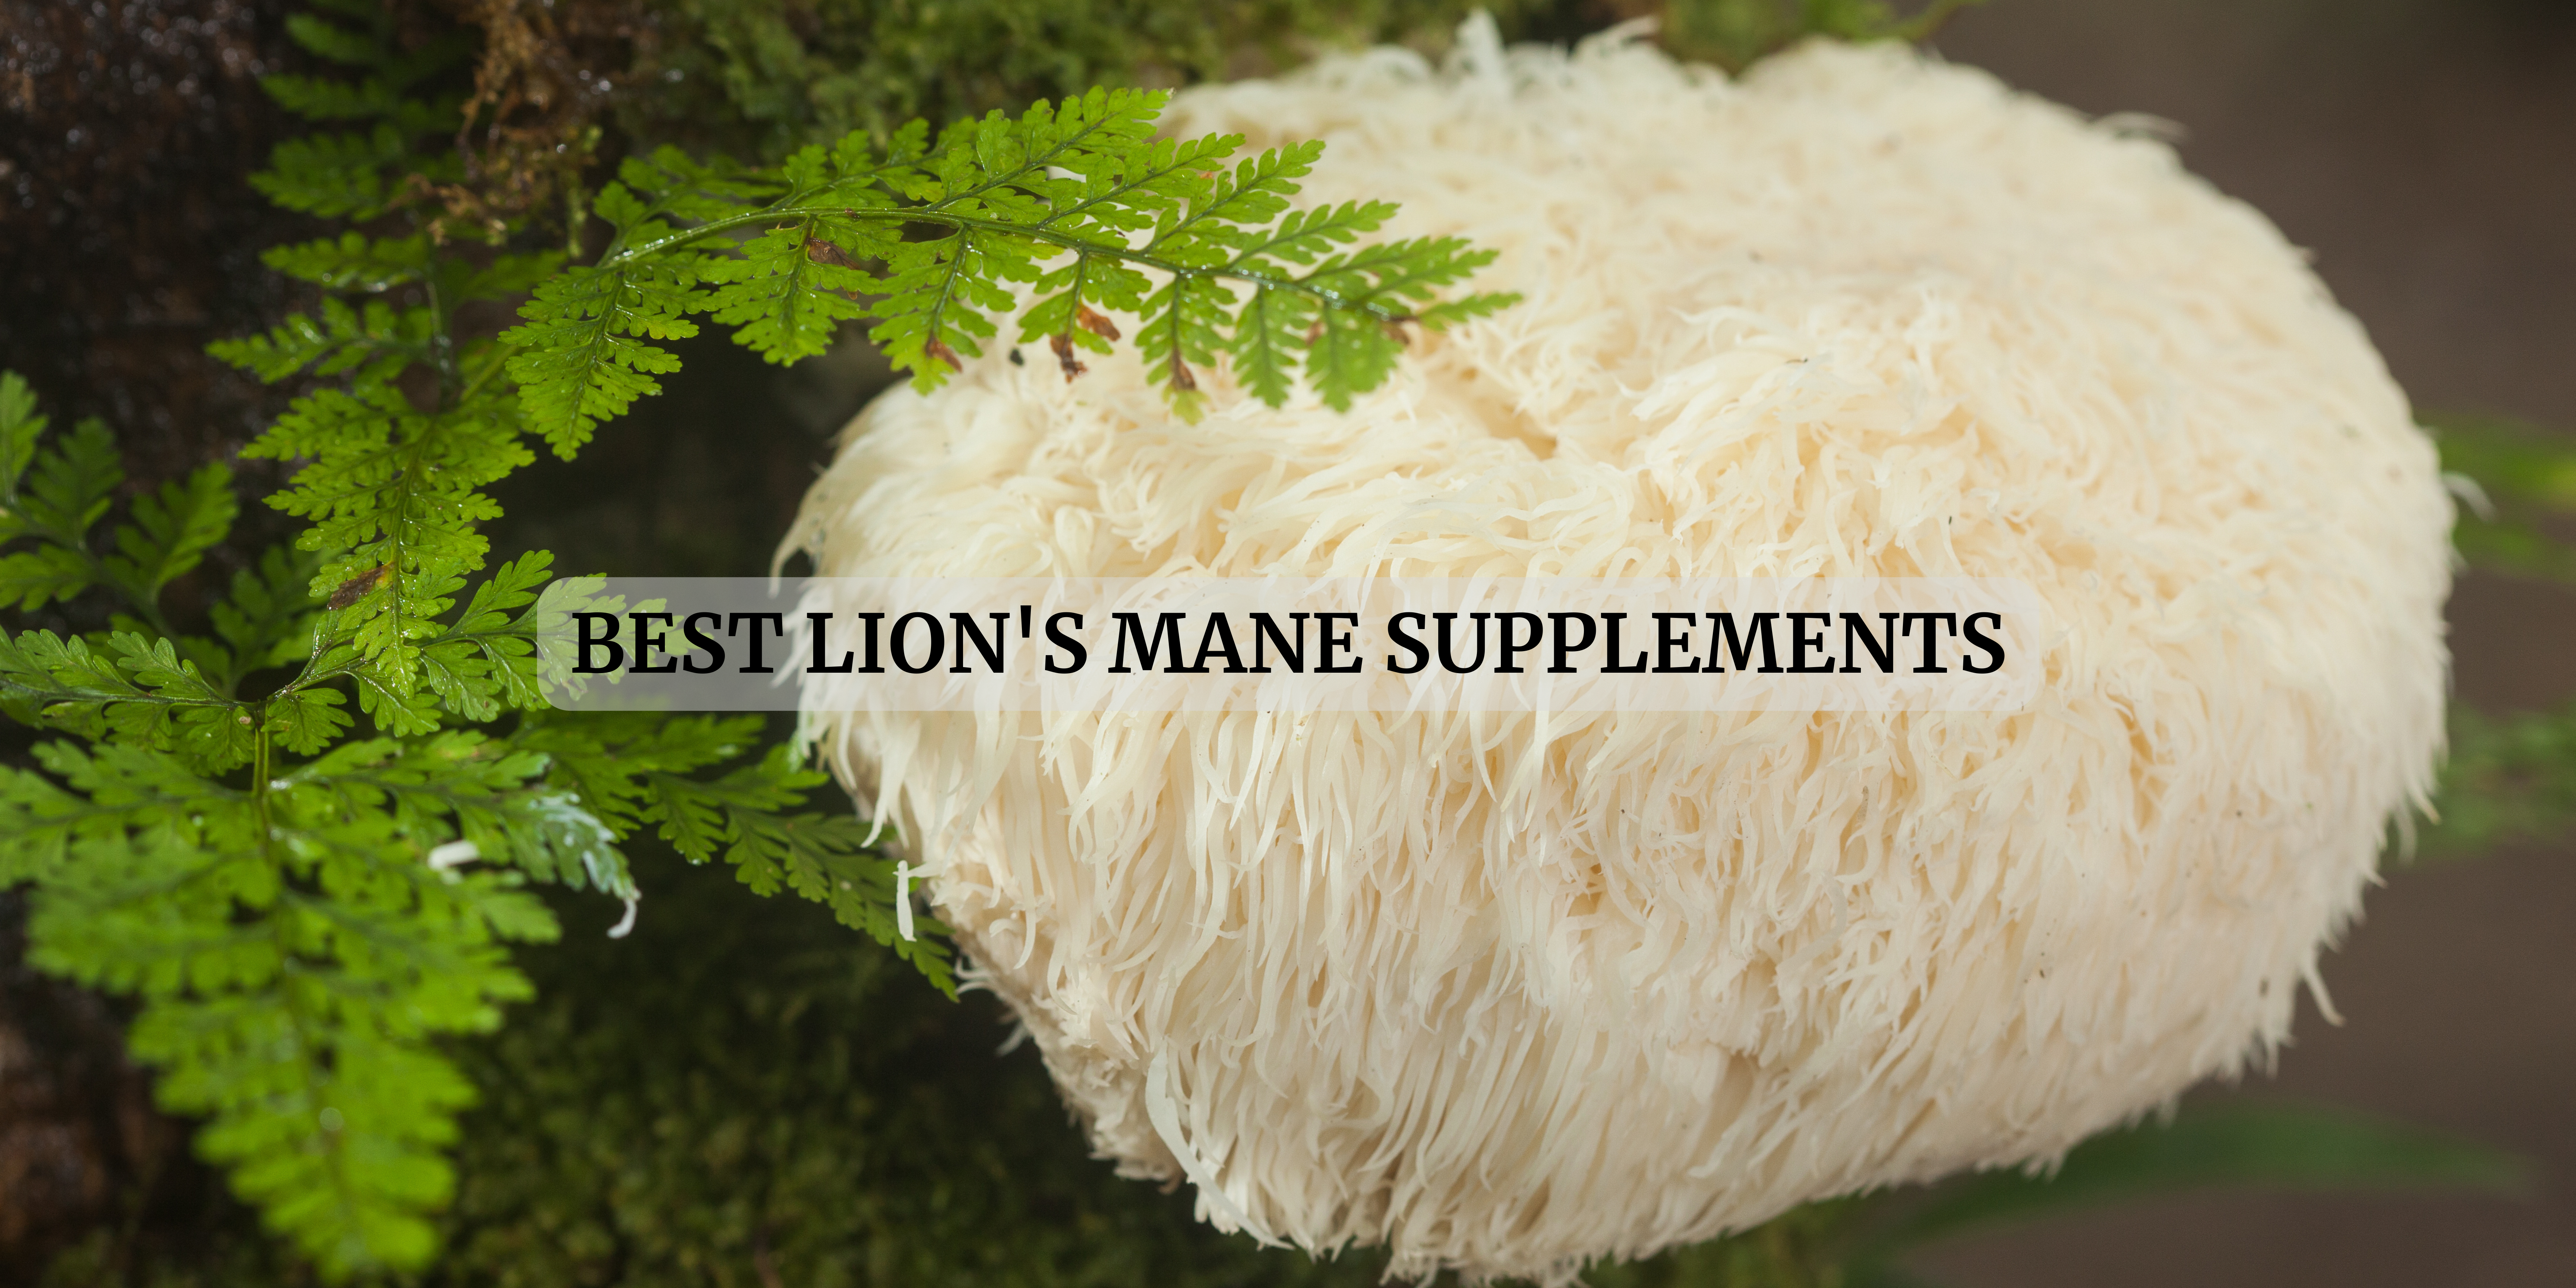 lion's mane supplements in Italy